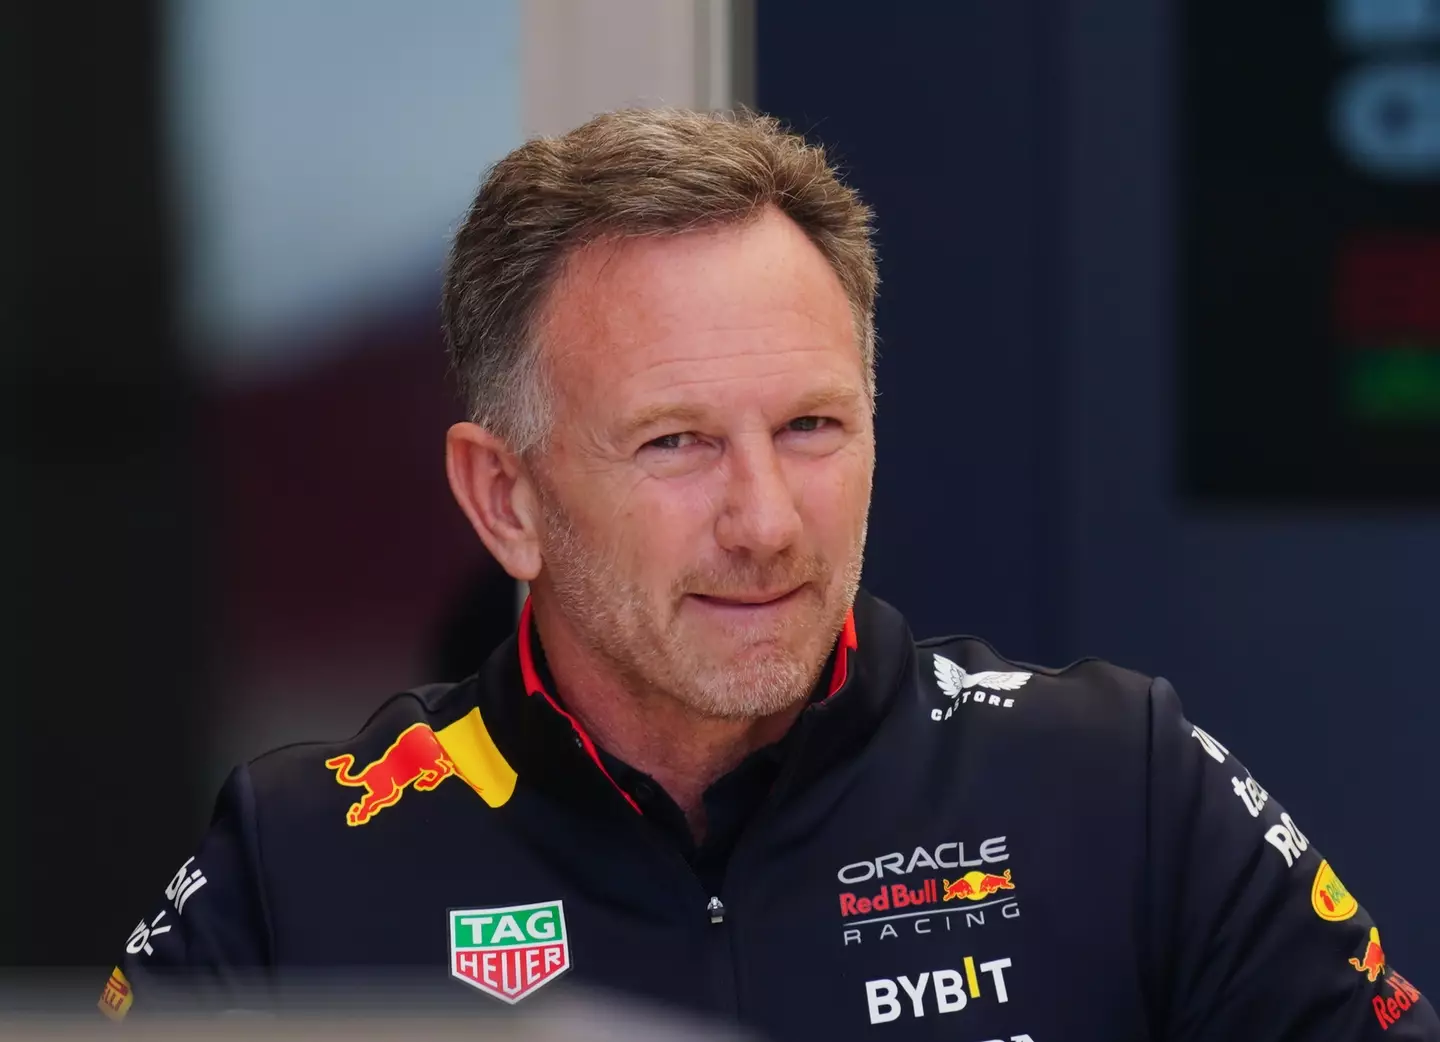 Christian Horner has said he intends to continue at Red Bull for the season.